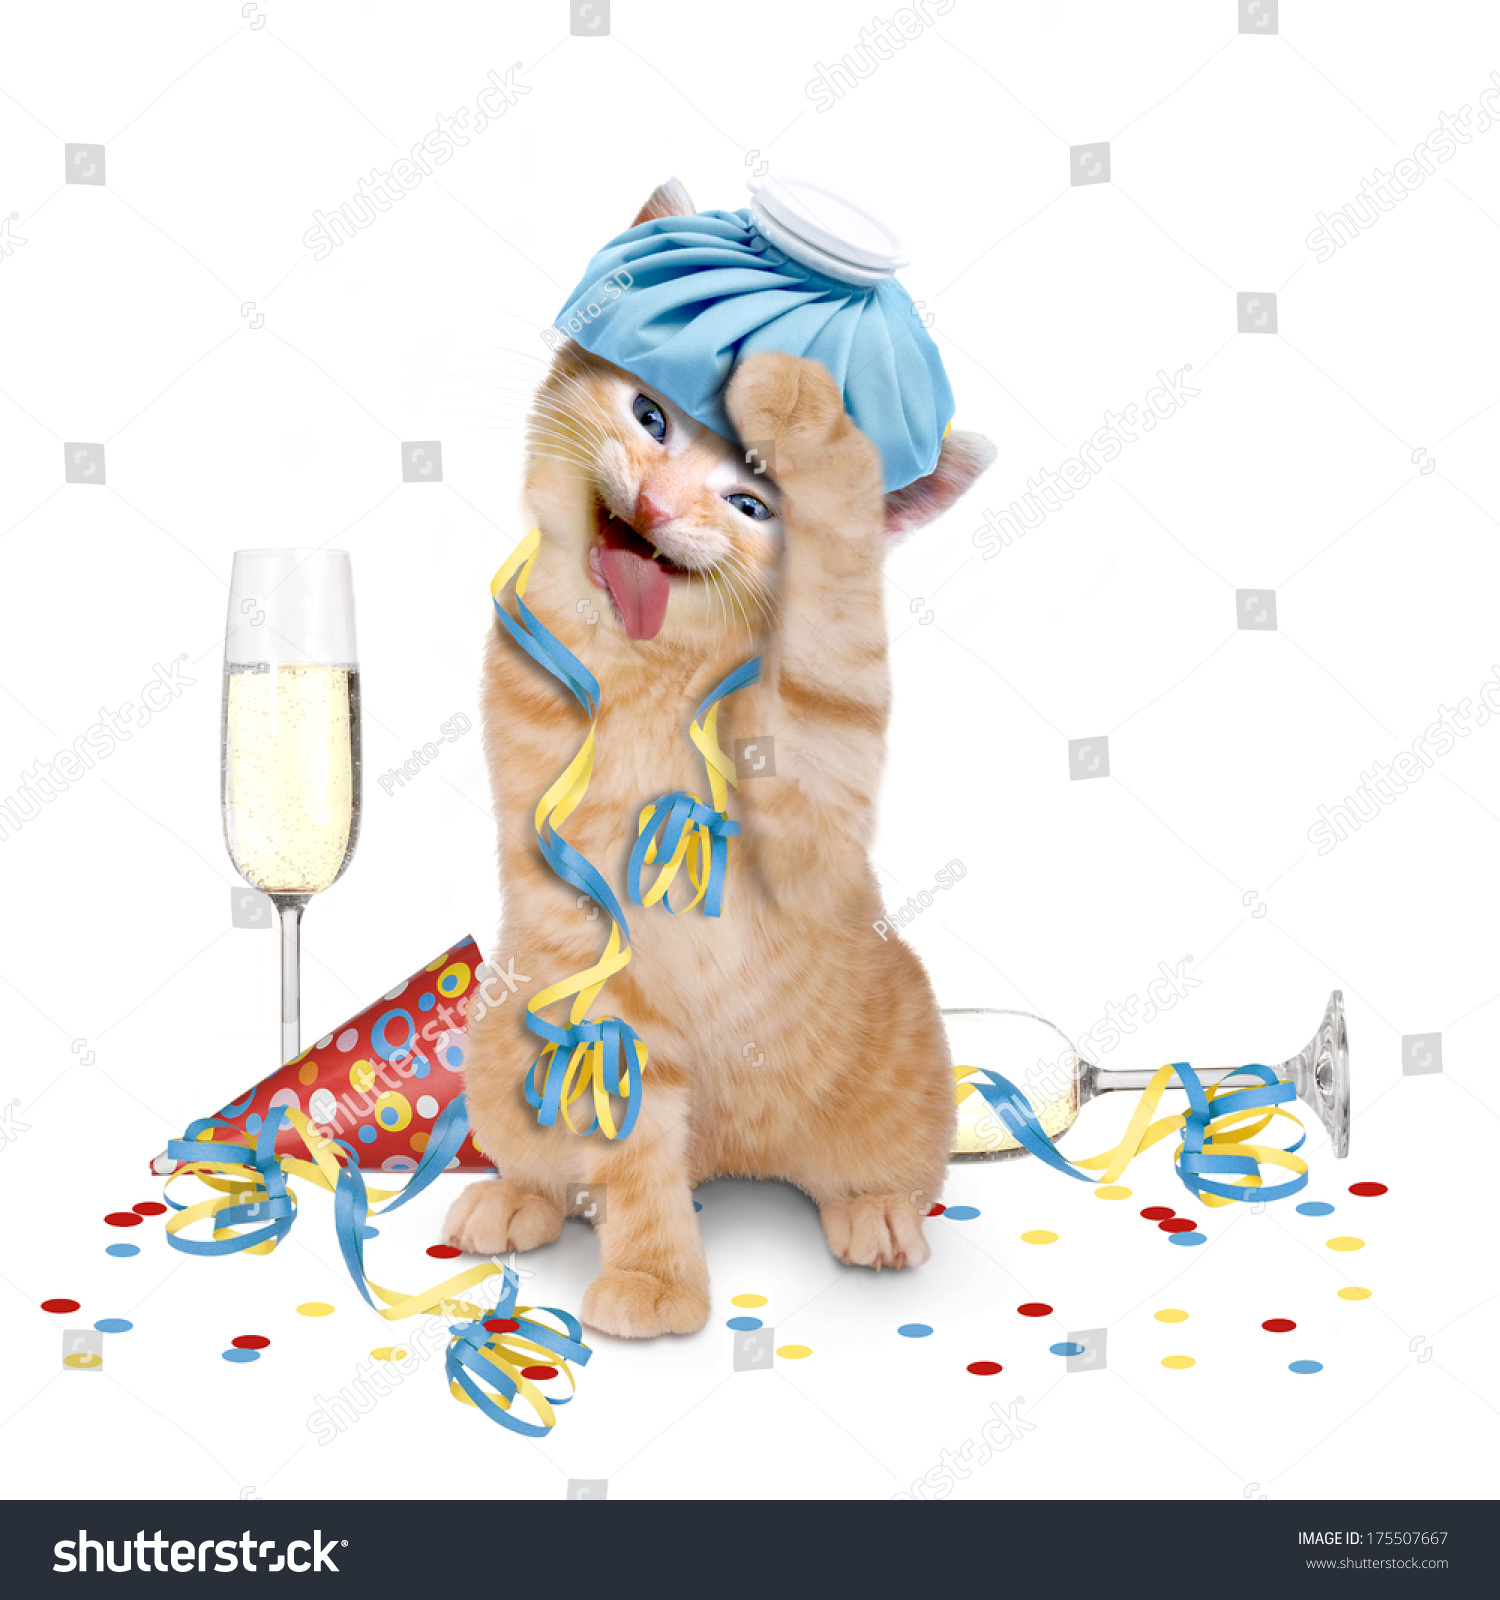 Hangover, cat with ice pack on his head on white background #175507667